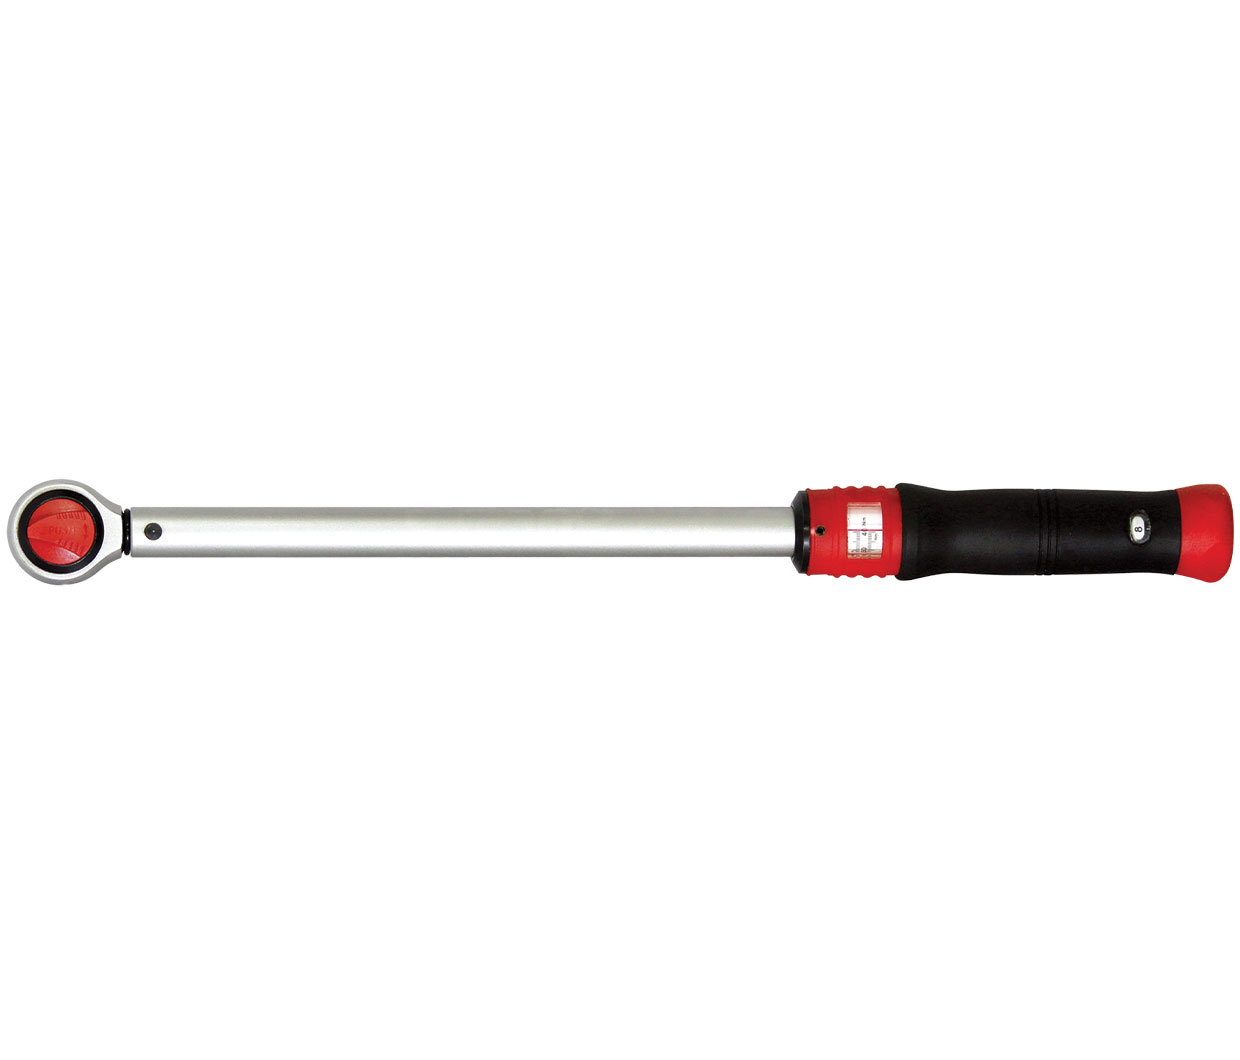 ICCONS TORQUE WRENCH ADJUSTABLE 1/2'' DR.40-200N 